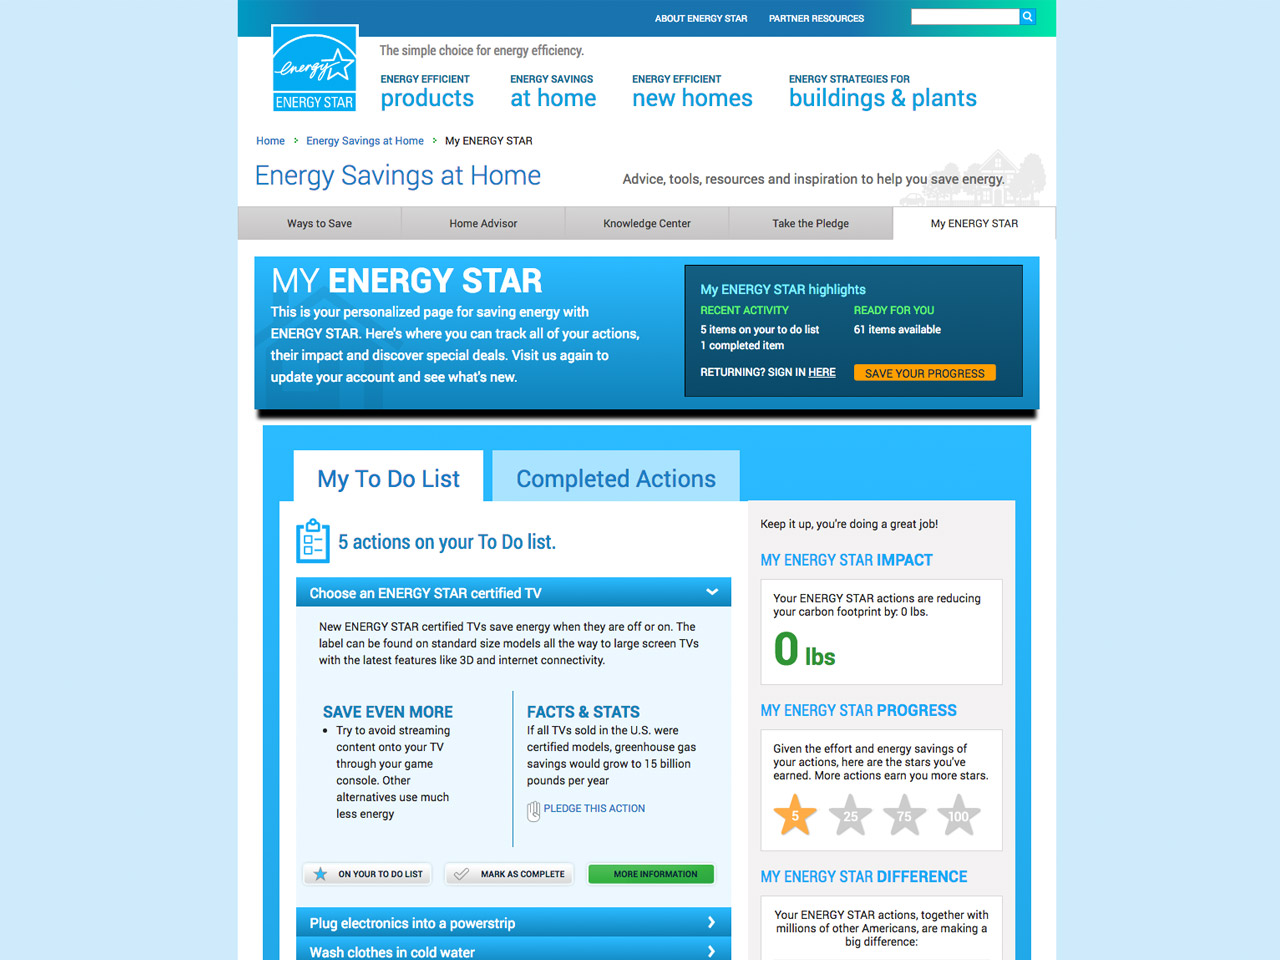 UX Strategy and Design of My ENERGY STAR dashboard